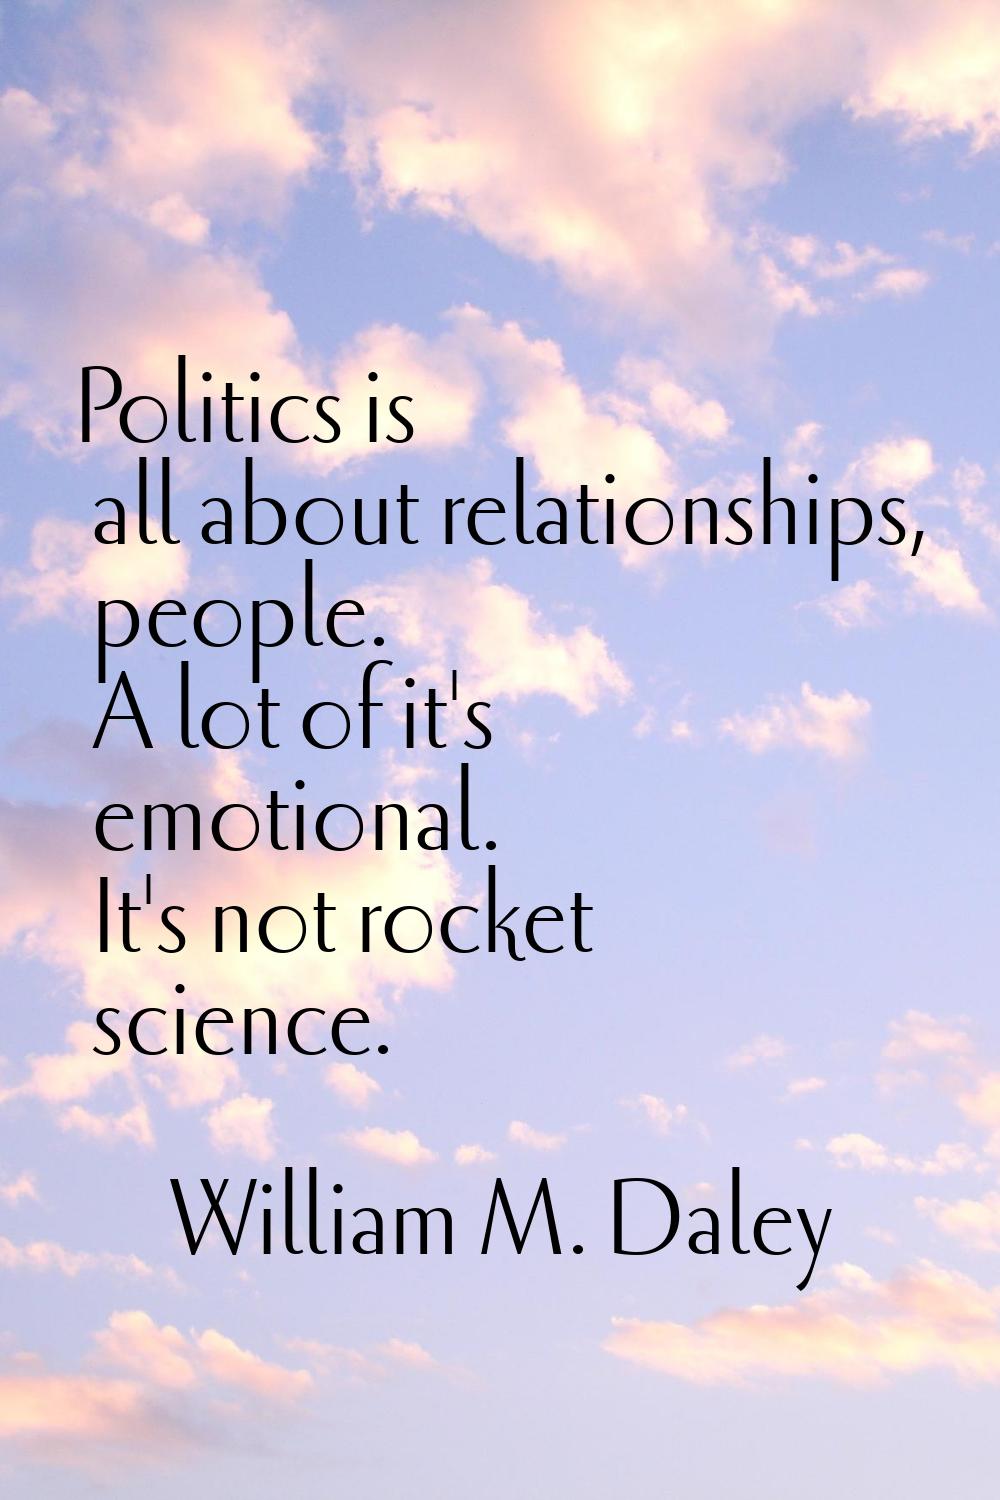 Politics is all about relationships, people. A lot of it's emotional. It's not rocket science.